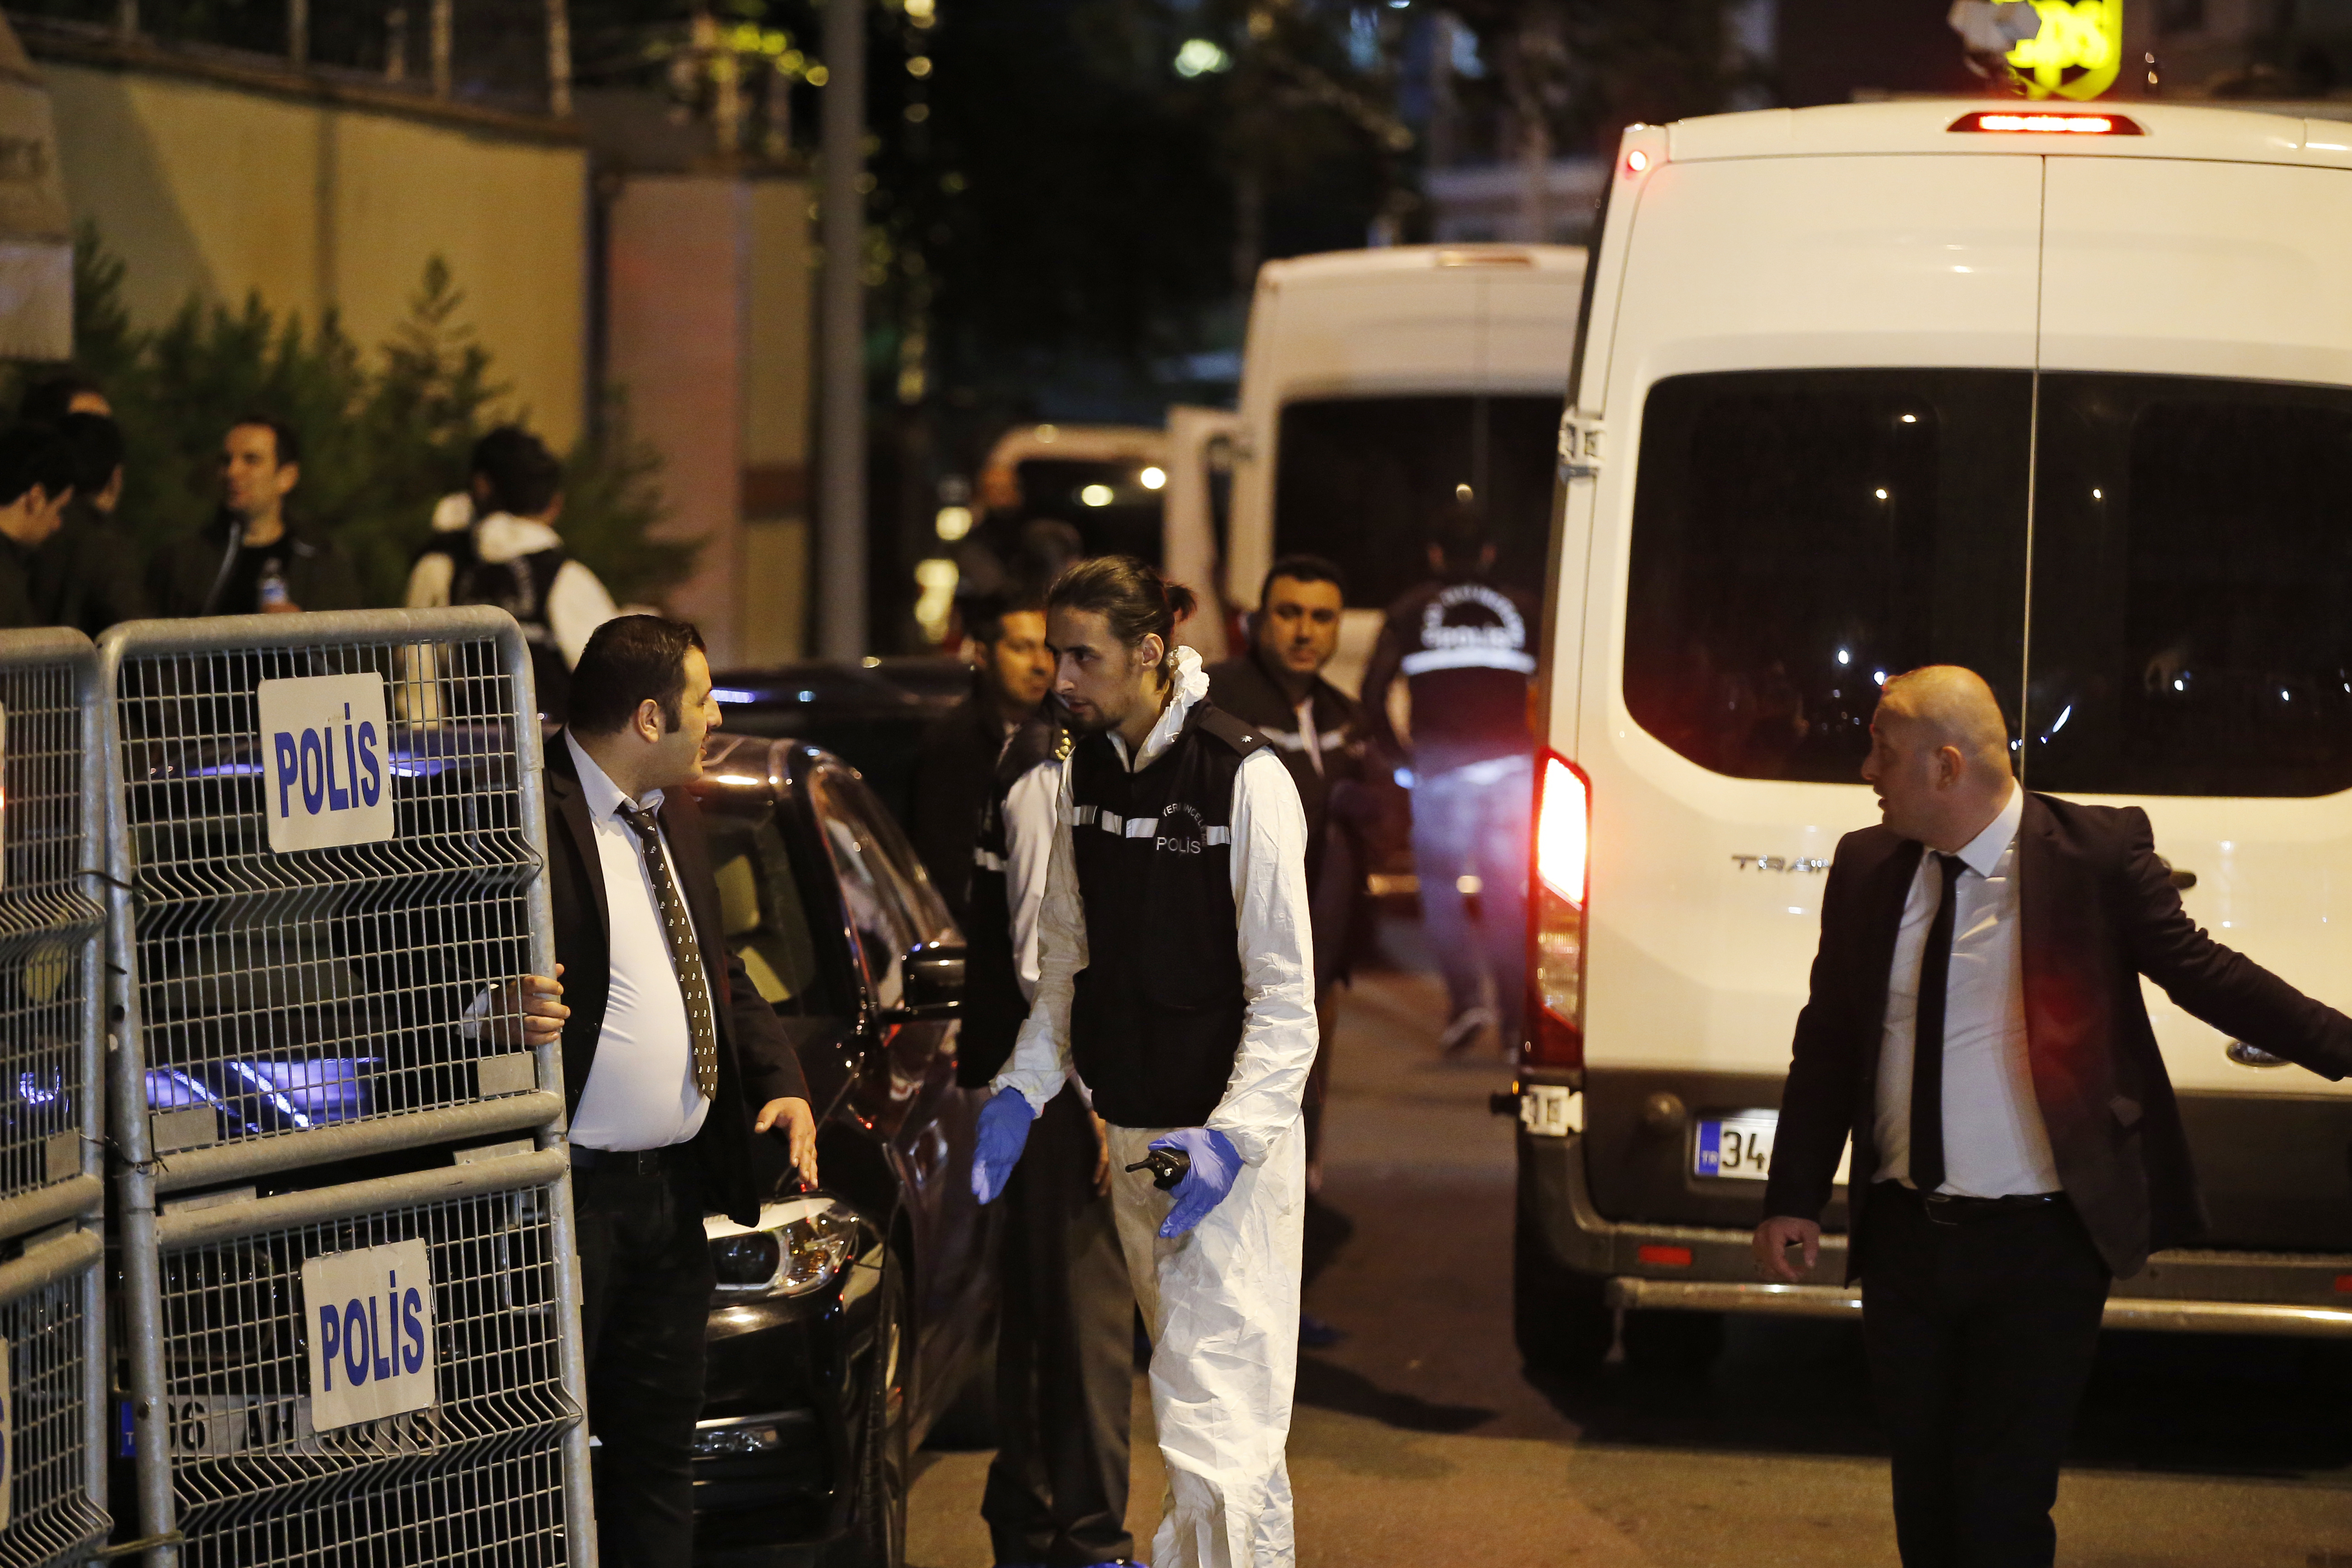 Turkish police officers at Saudi Arabia's consulate in Istanbul on Monday